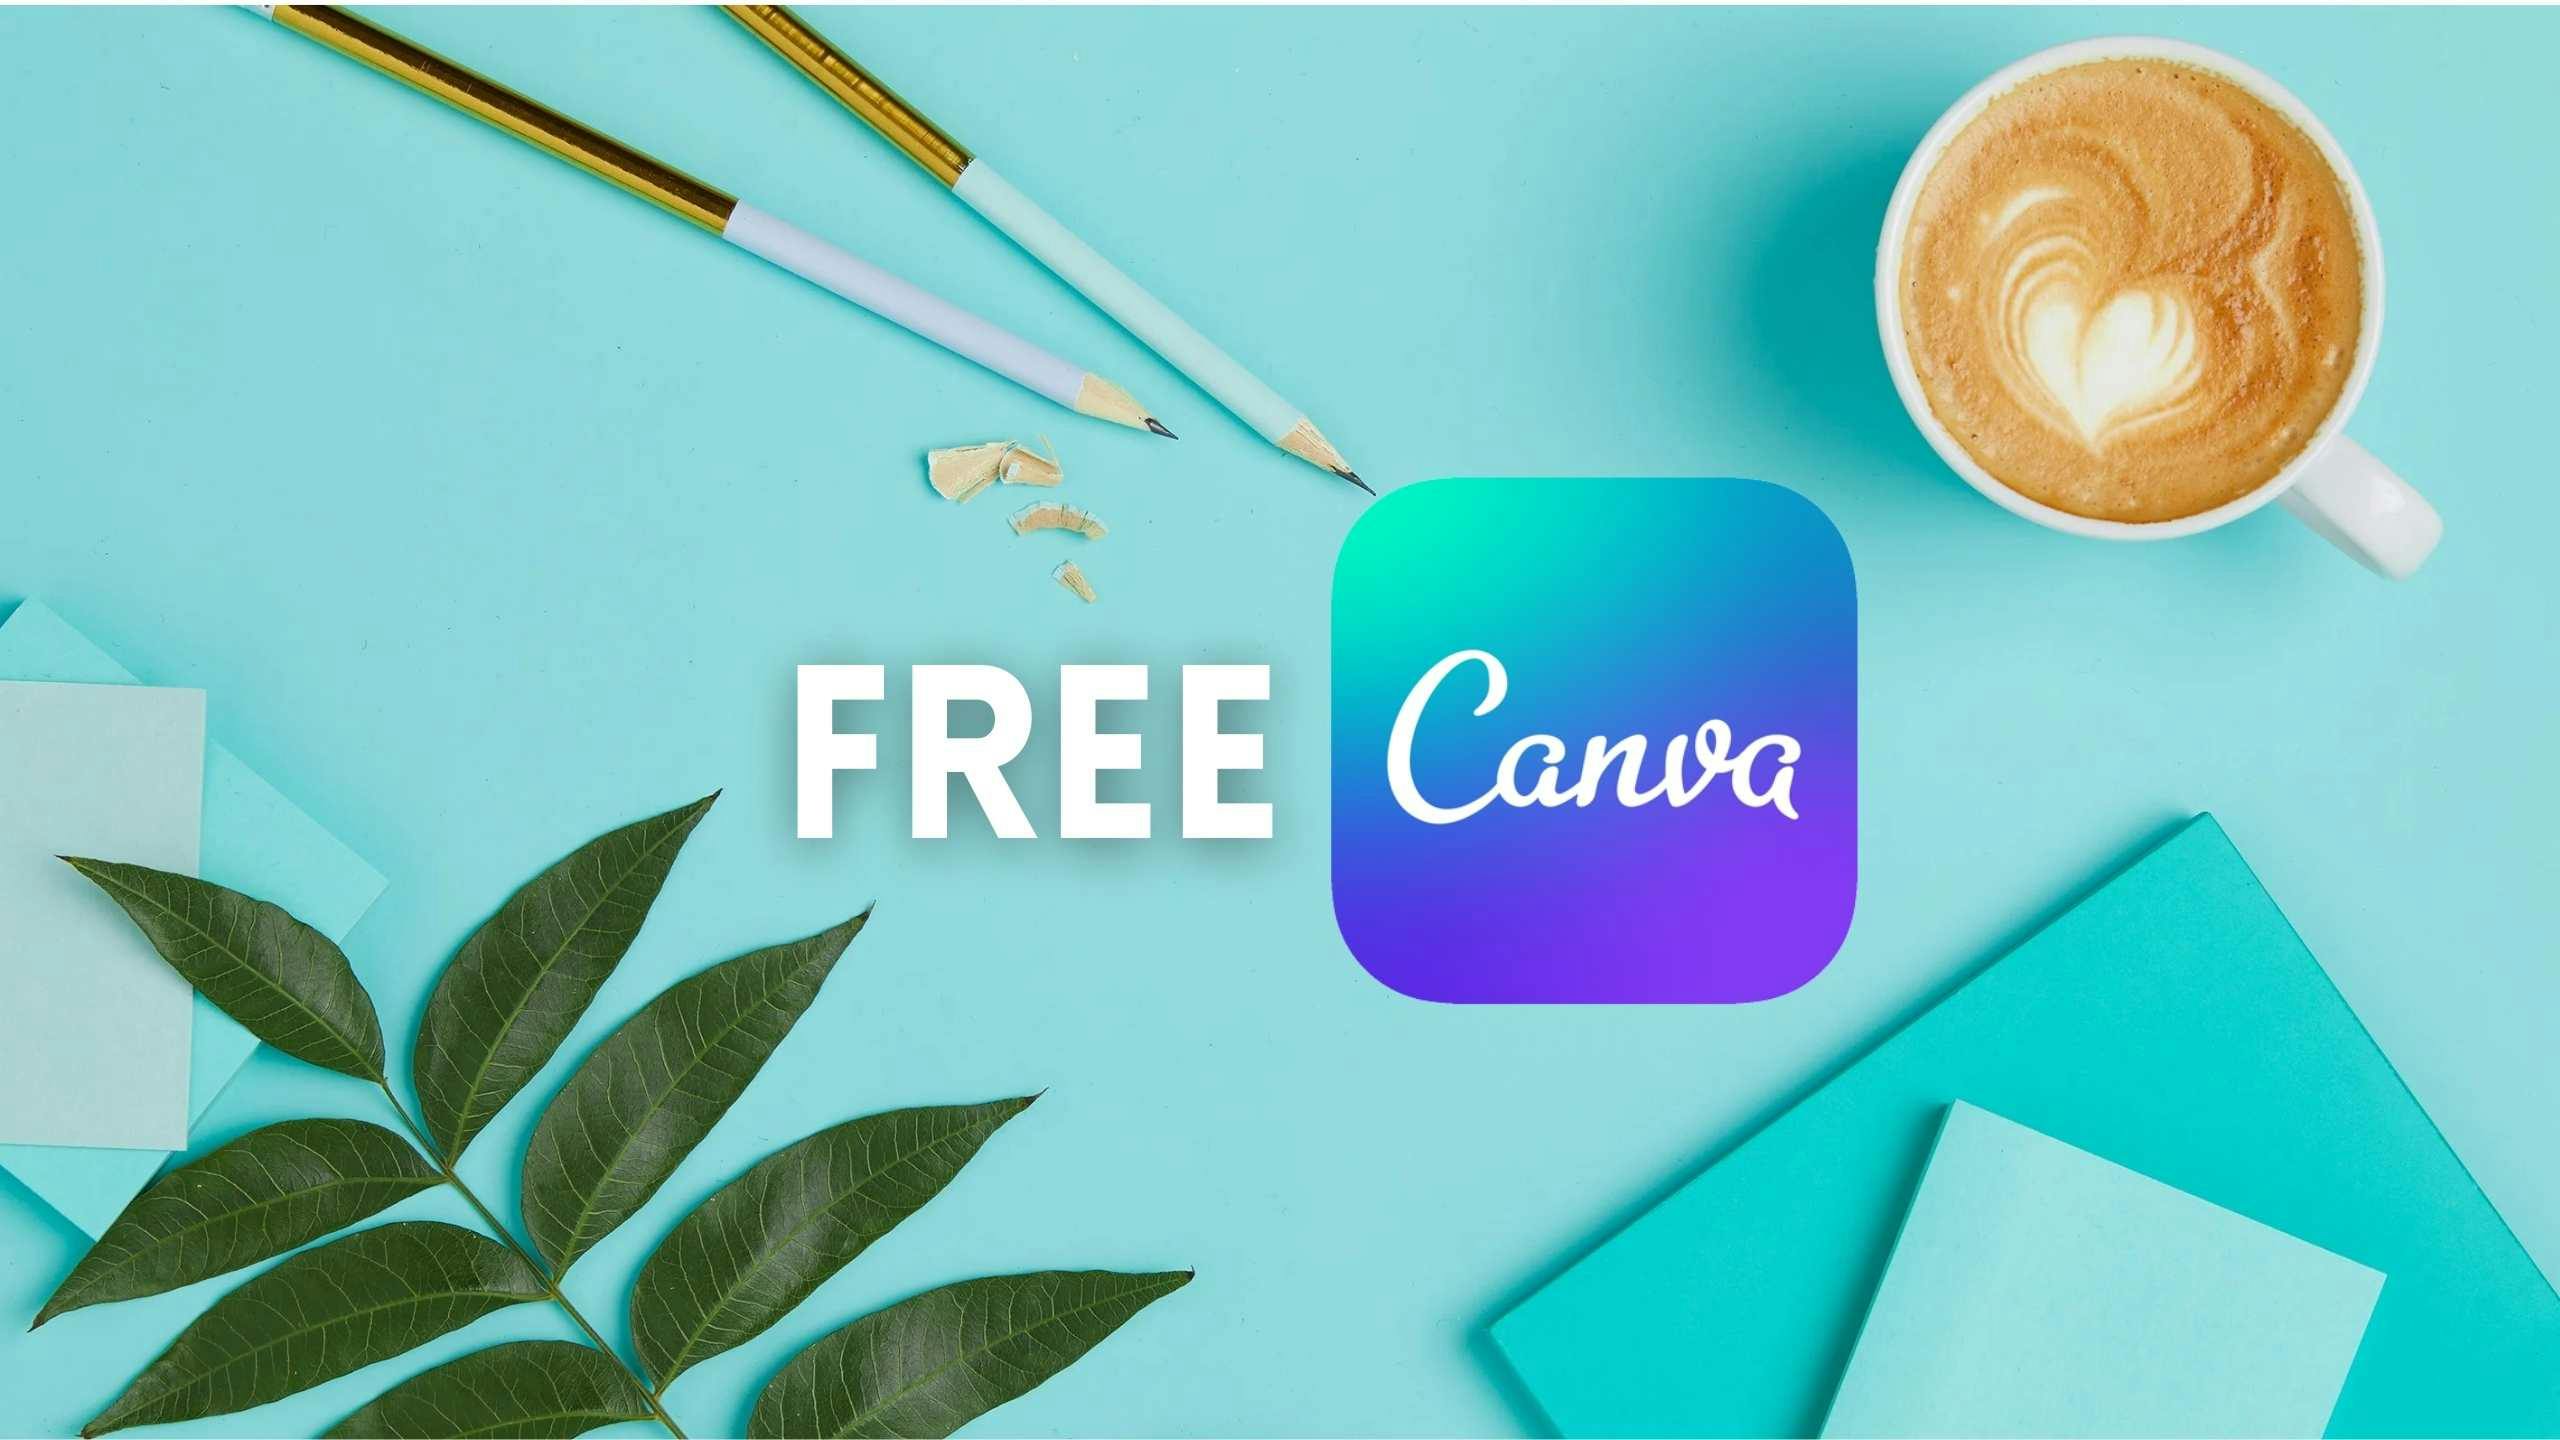 Get Free Canva's Pro tier subscription for 12 months